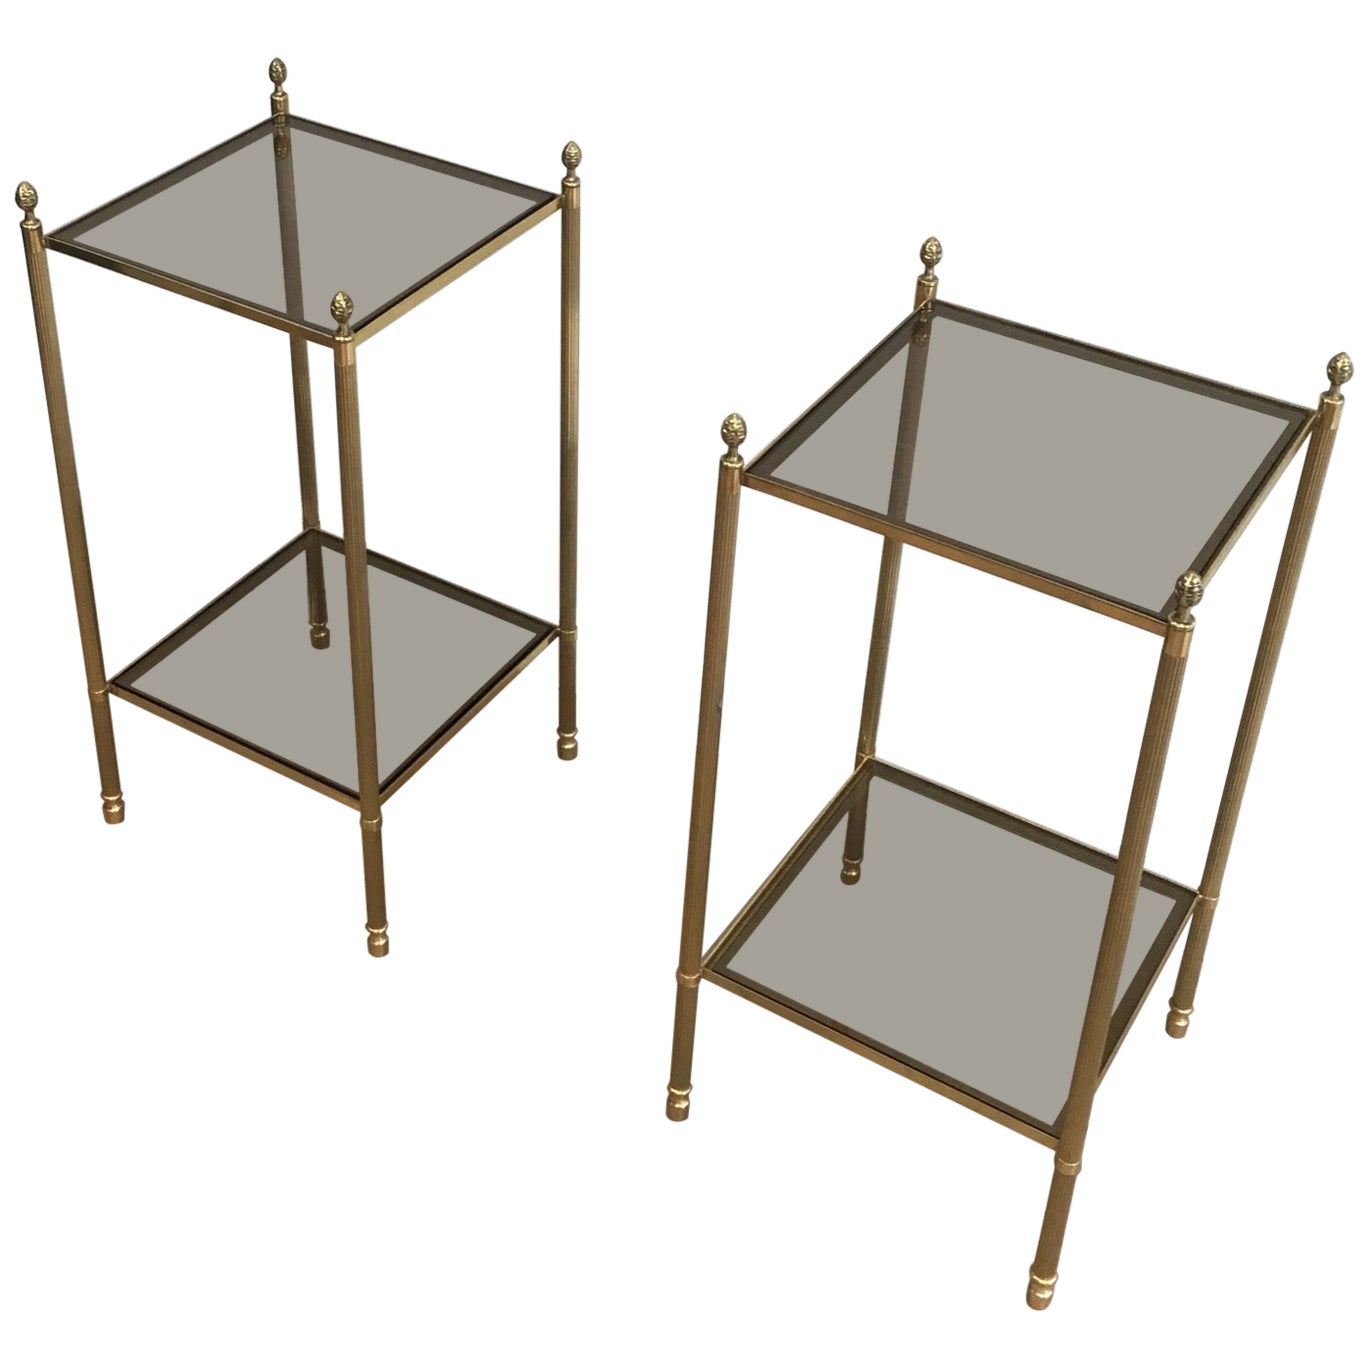 Maison Jansen, Pair of Neoclassical Style Brass Side Tables